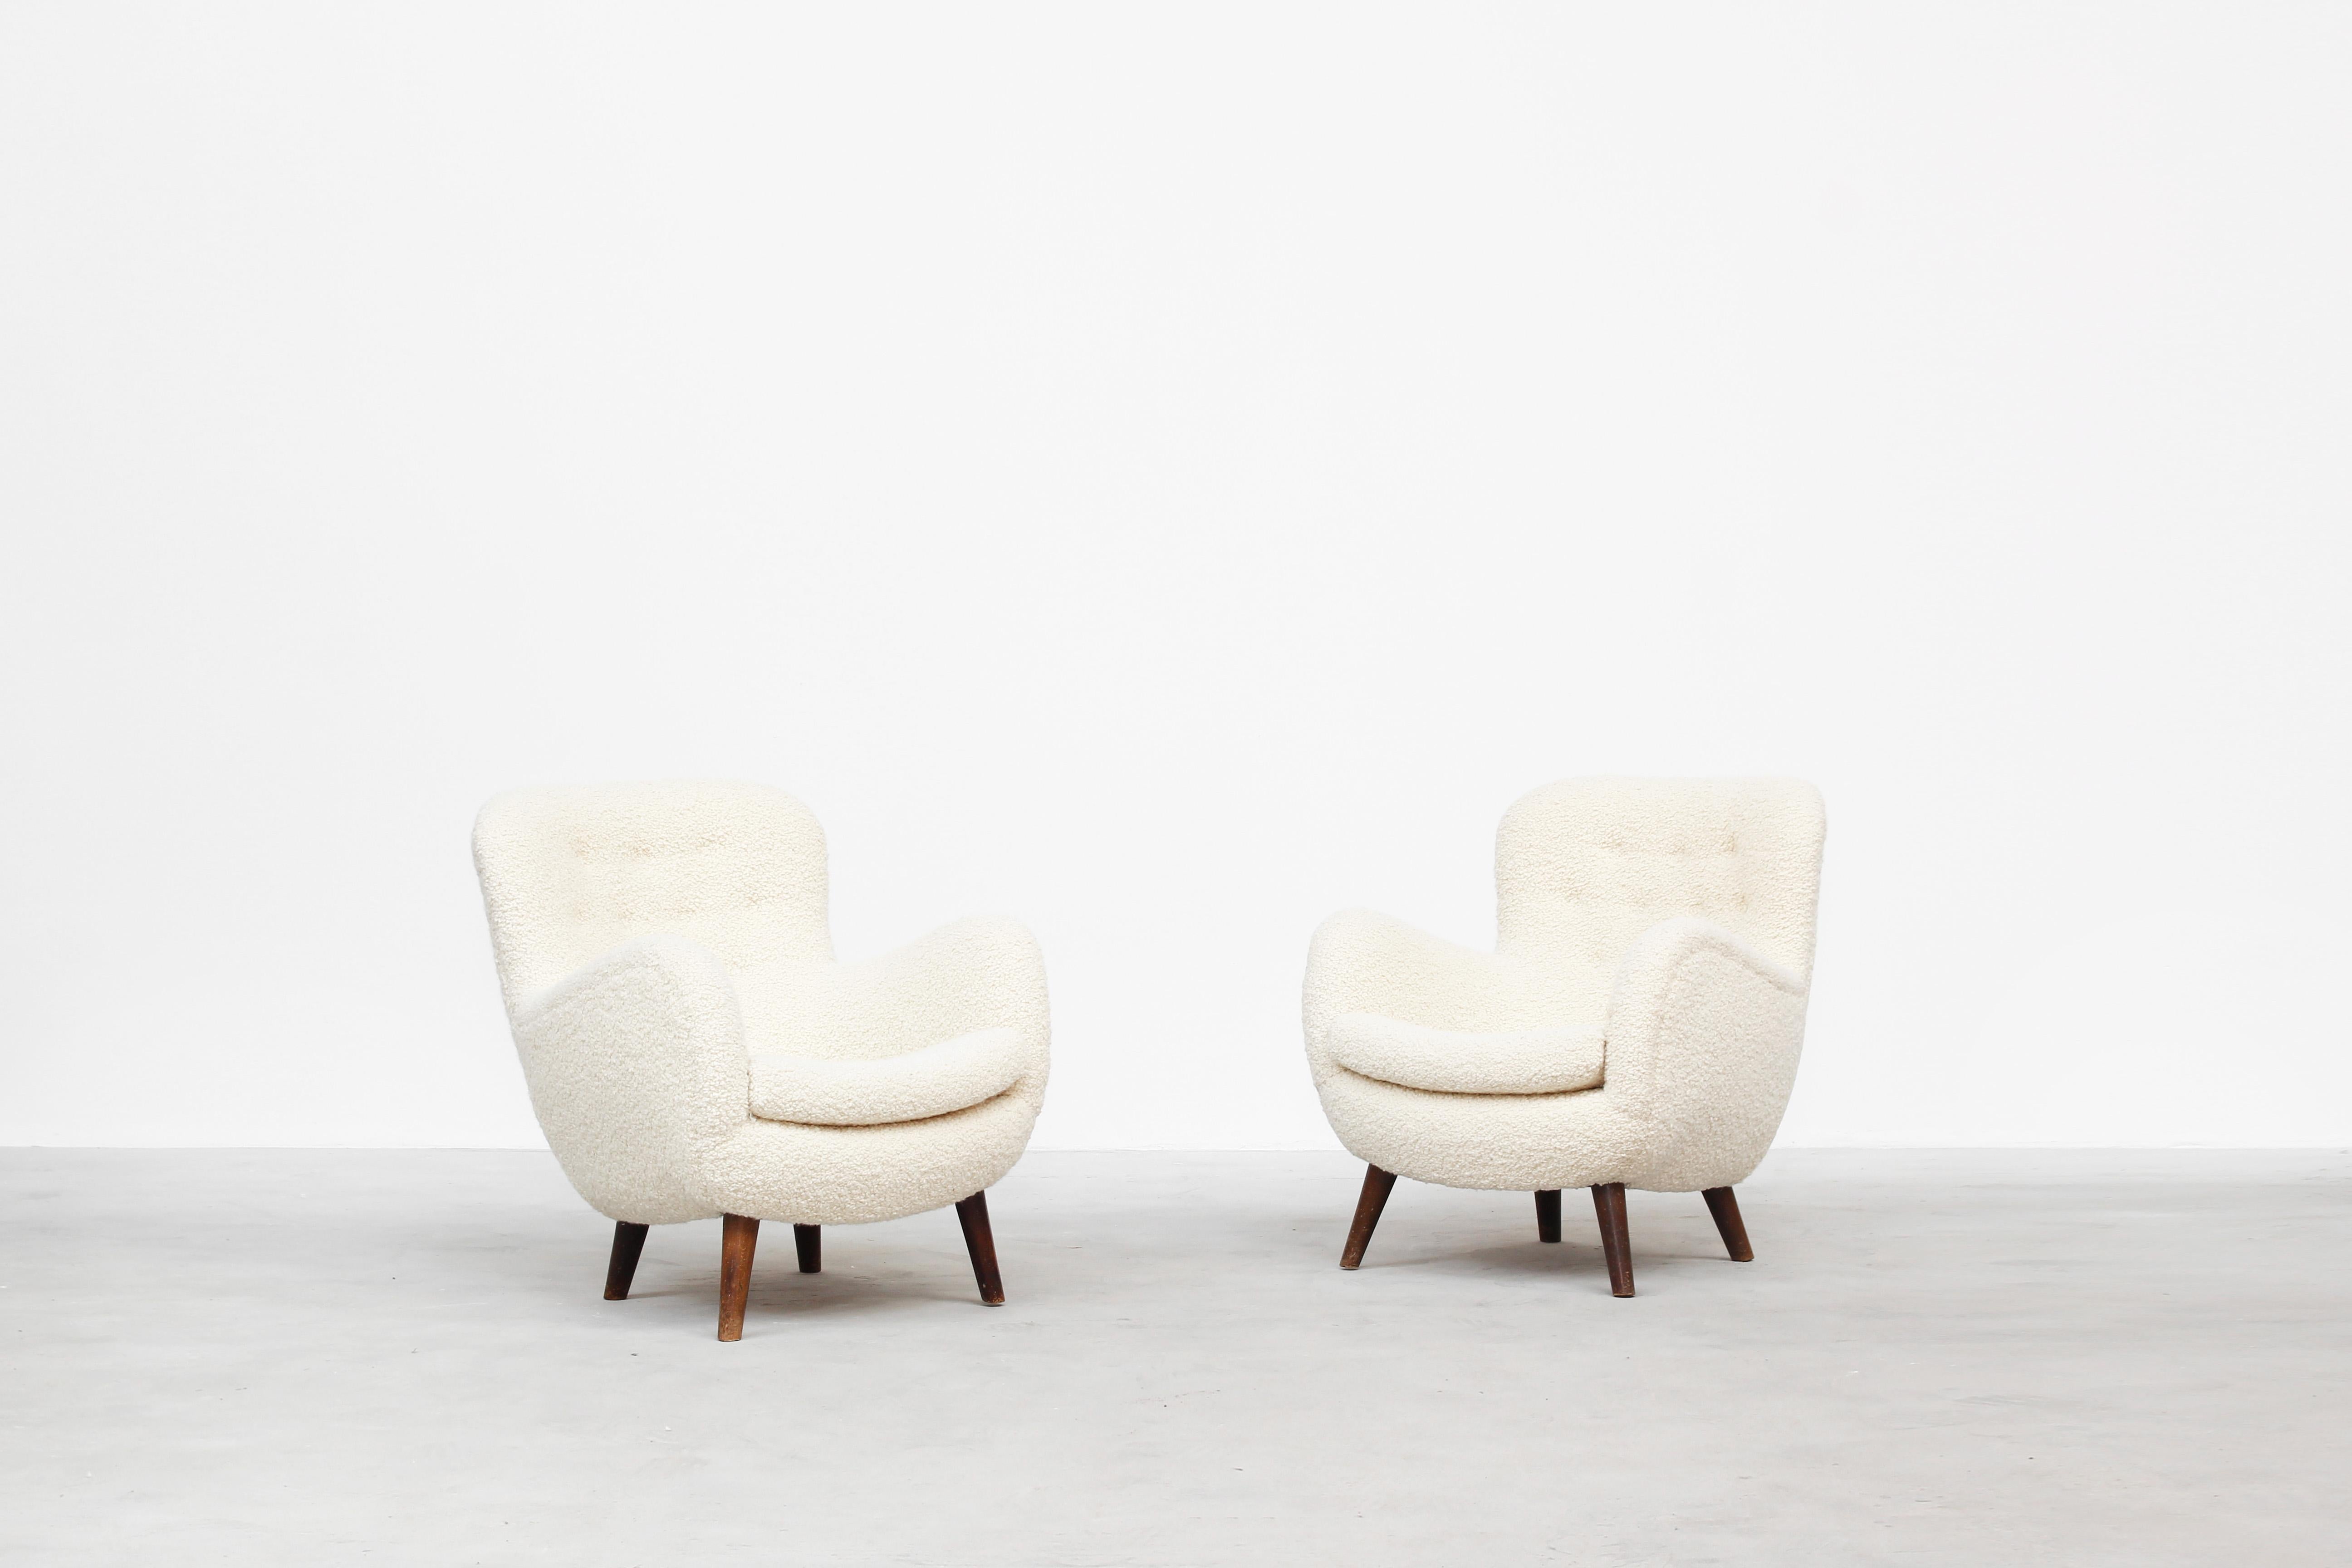 A beautiful pair of rare lounge chairs attributed to Frits Schlegel, made in Denmark, circa 1940s.
Upholstered in exclusive high-quality bouclé fabric by DEDAR in white- beige contrasting dark wooden legs.
Both chairs come in excellent